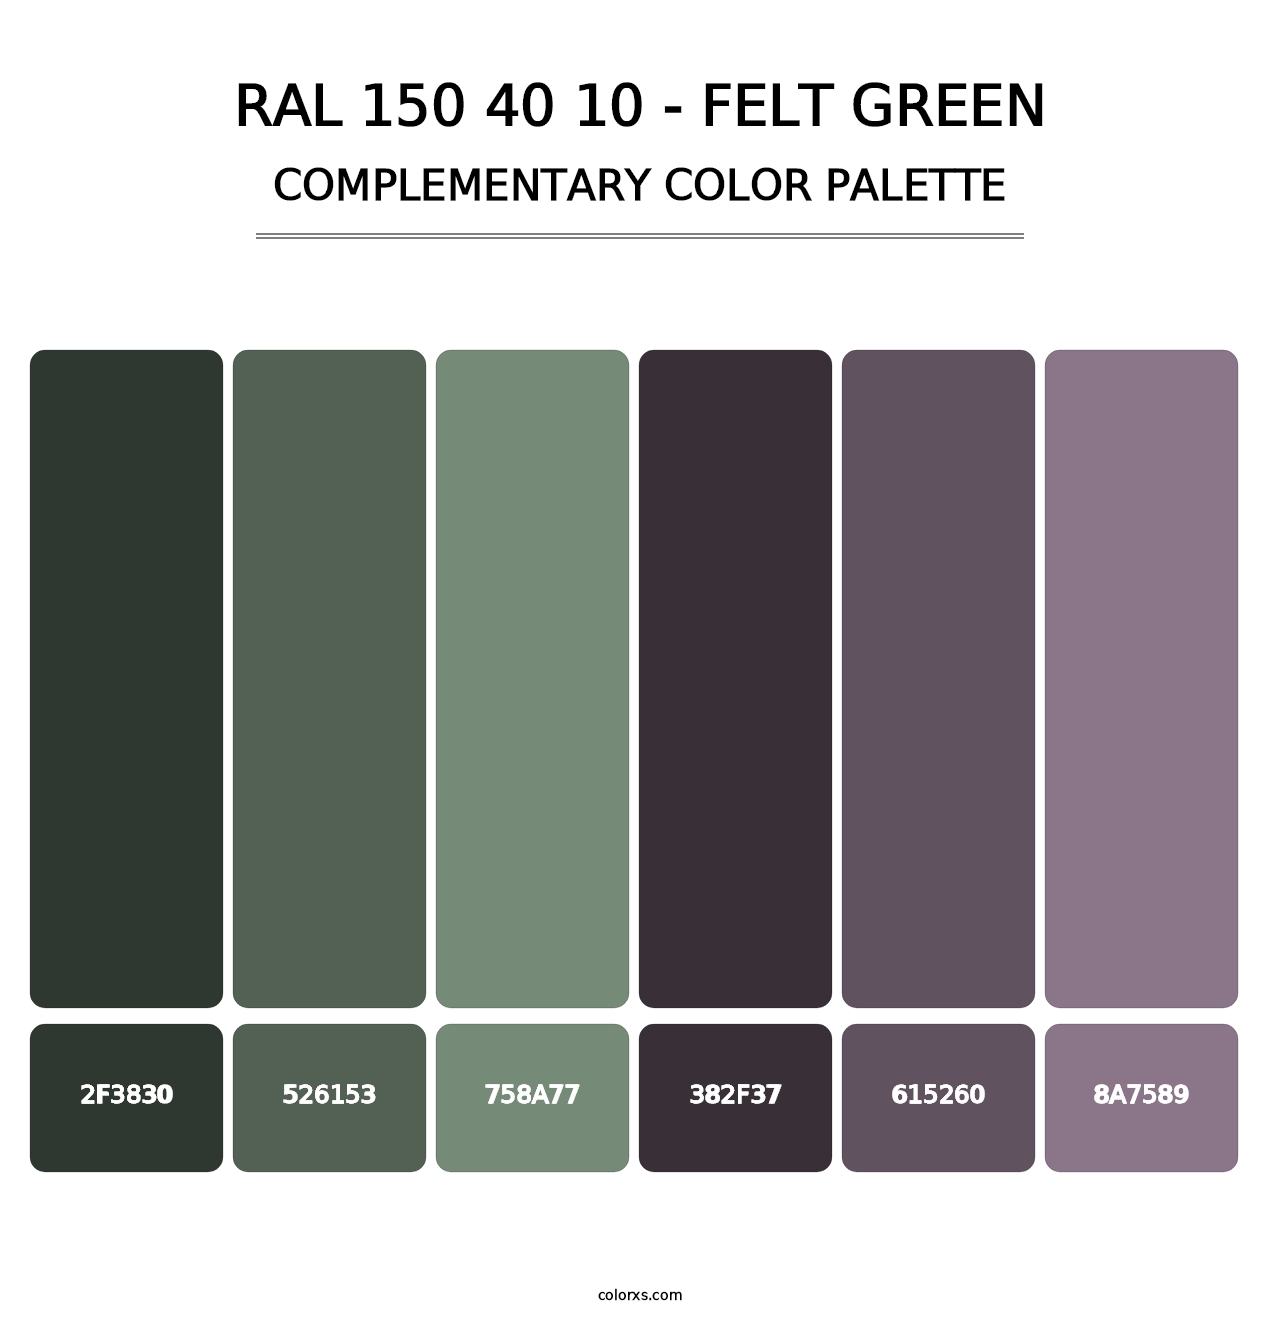 RAL 150 40 10 - Felt Green - Complementary Color Palette